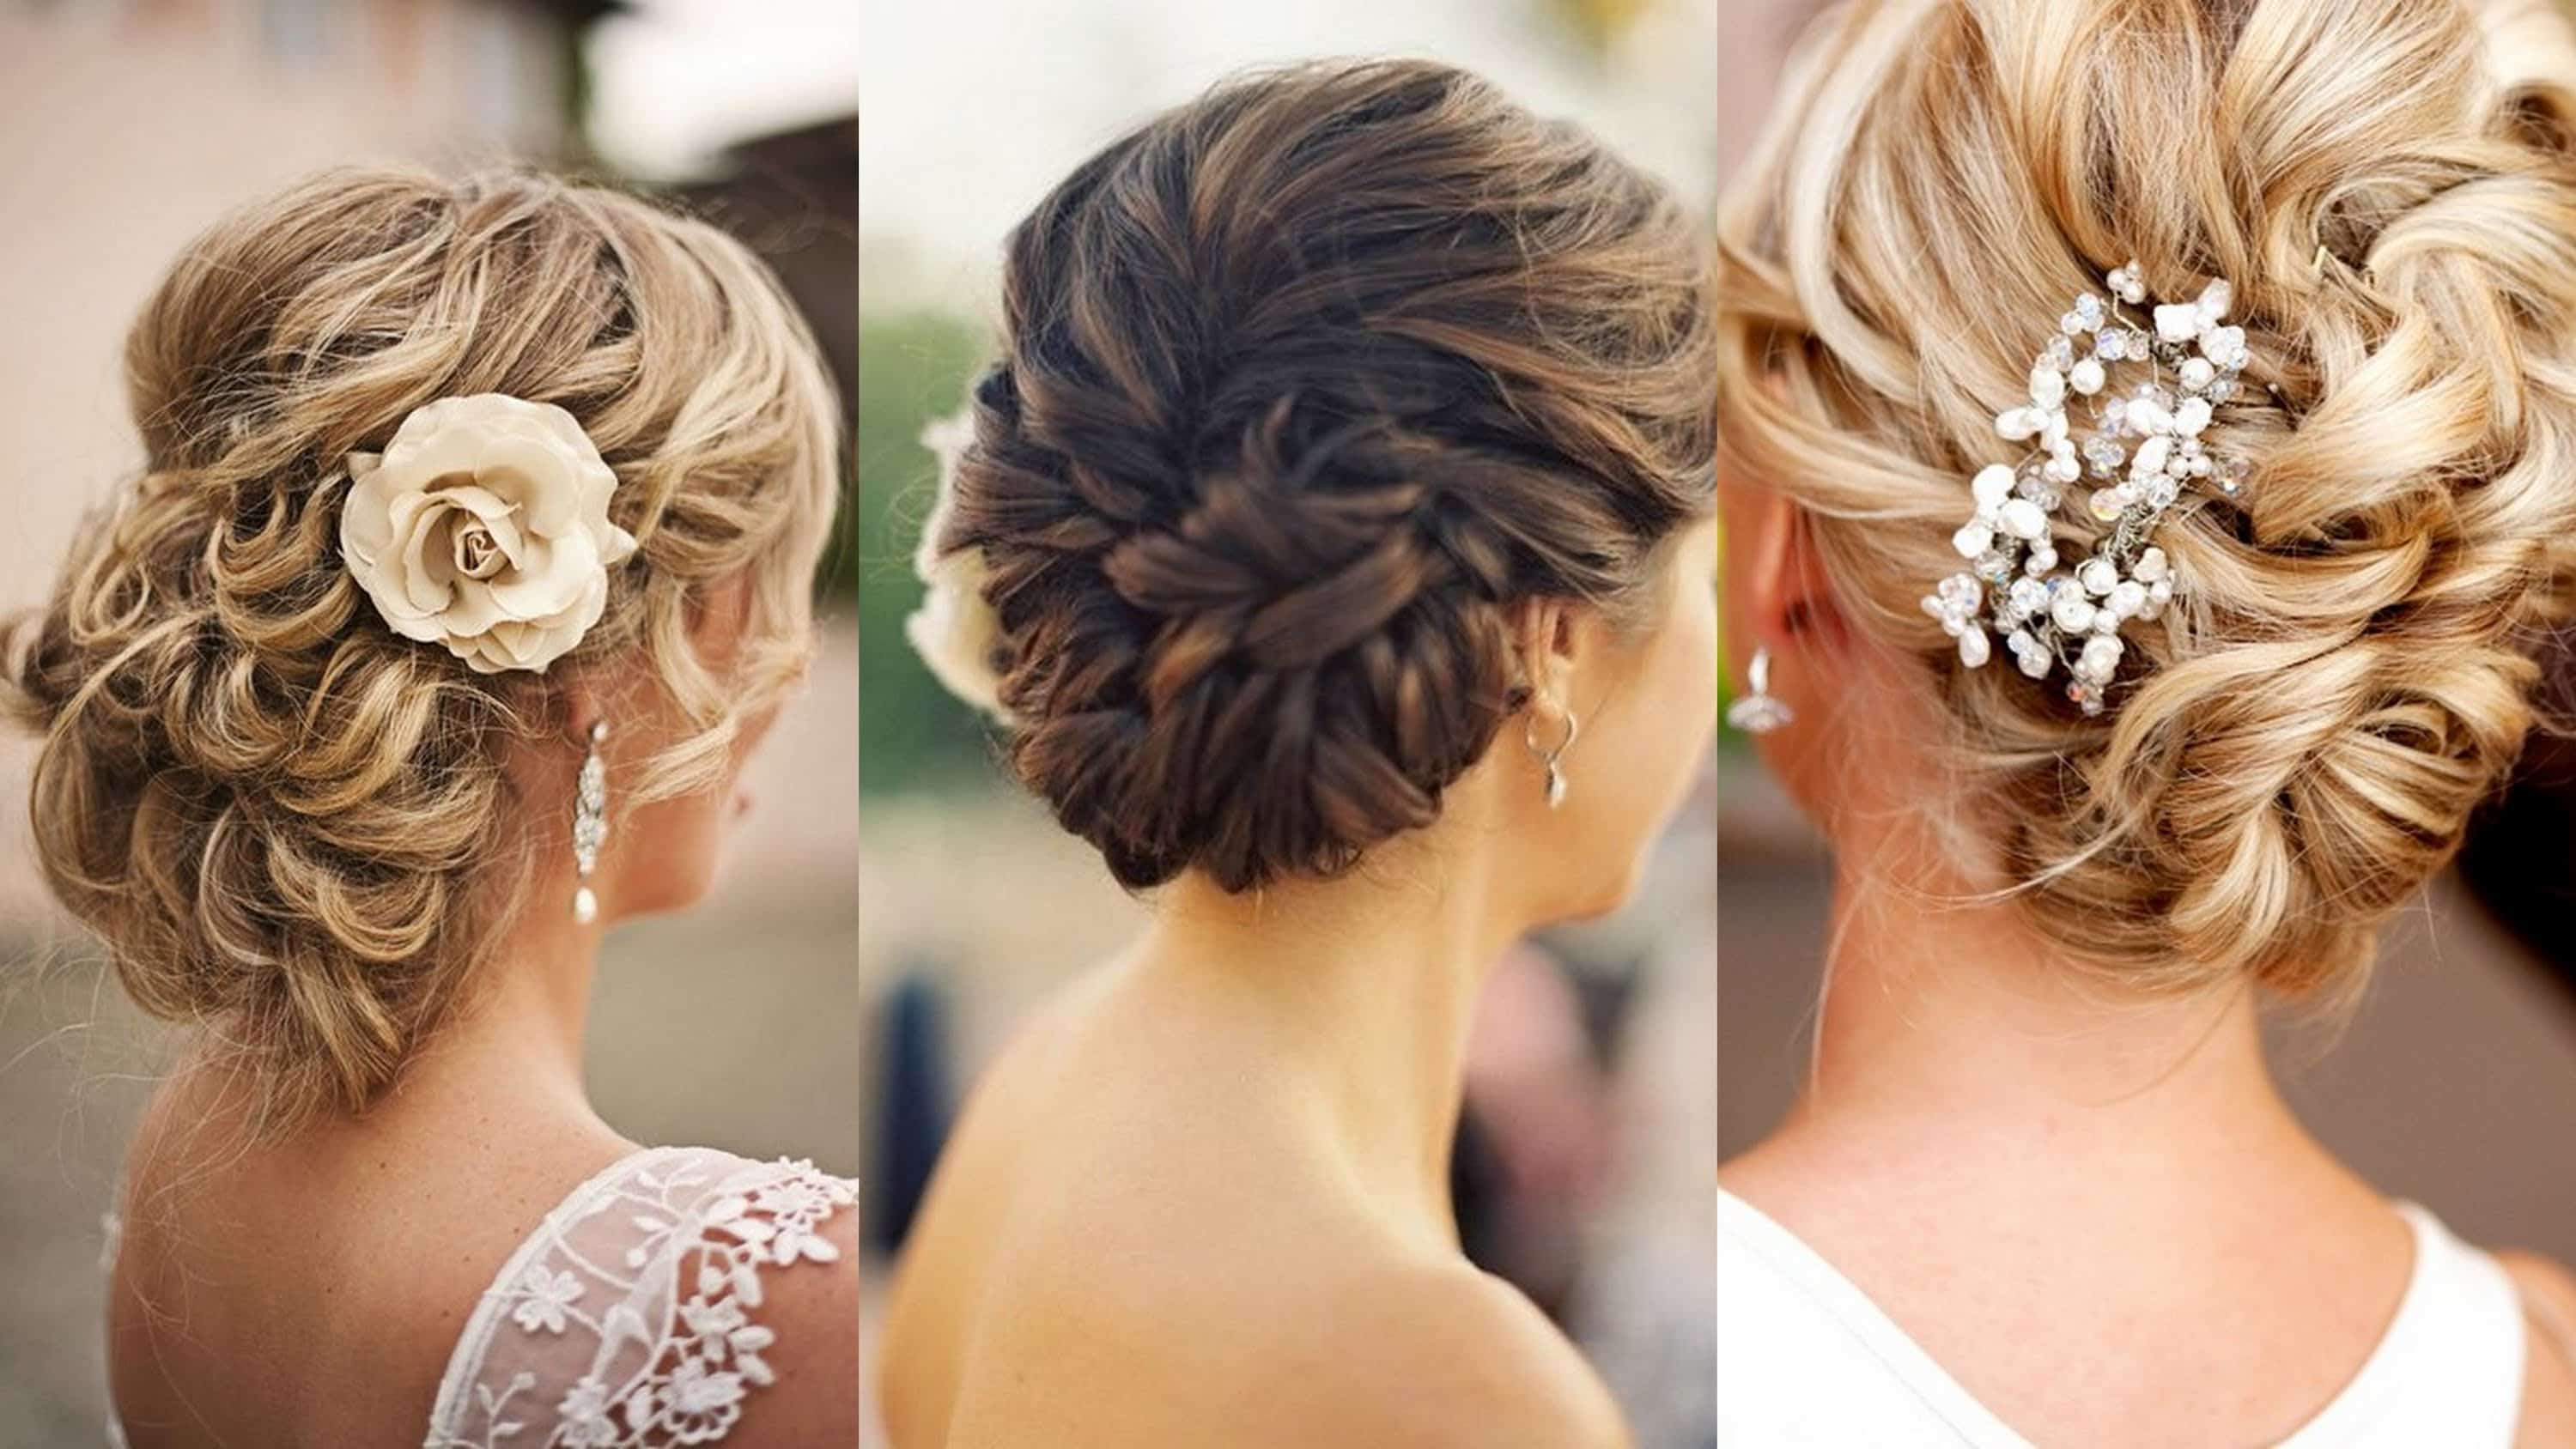 Let’s know about some Wedding Hairstyles